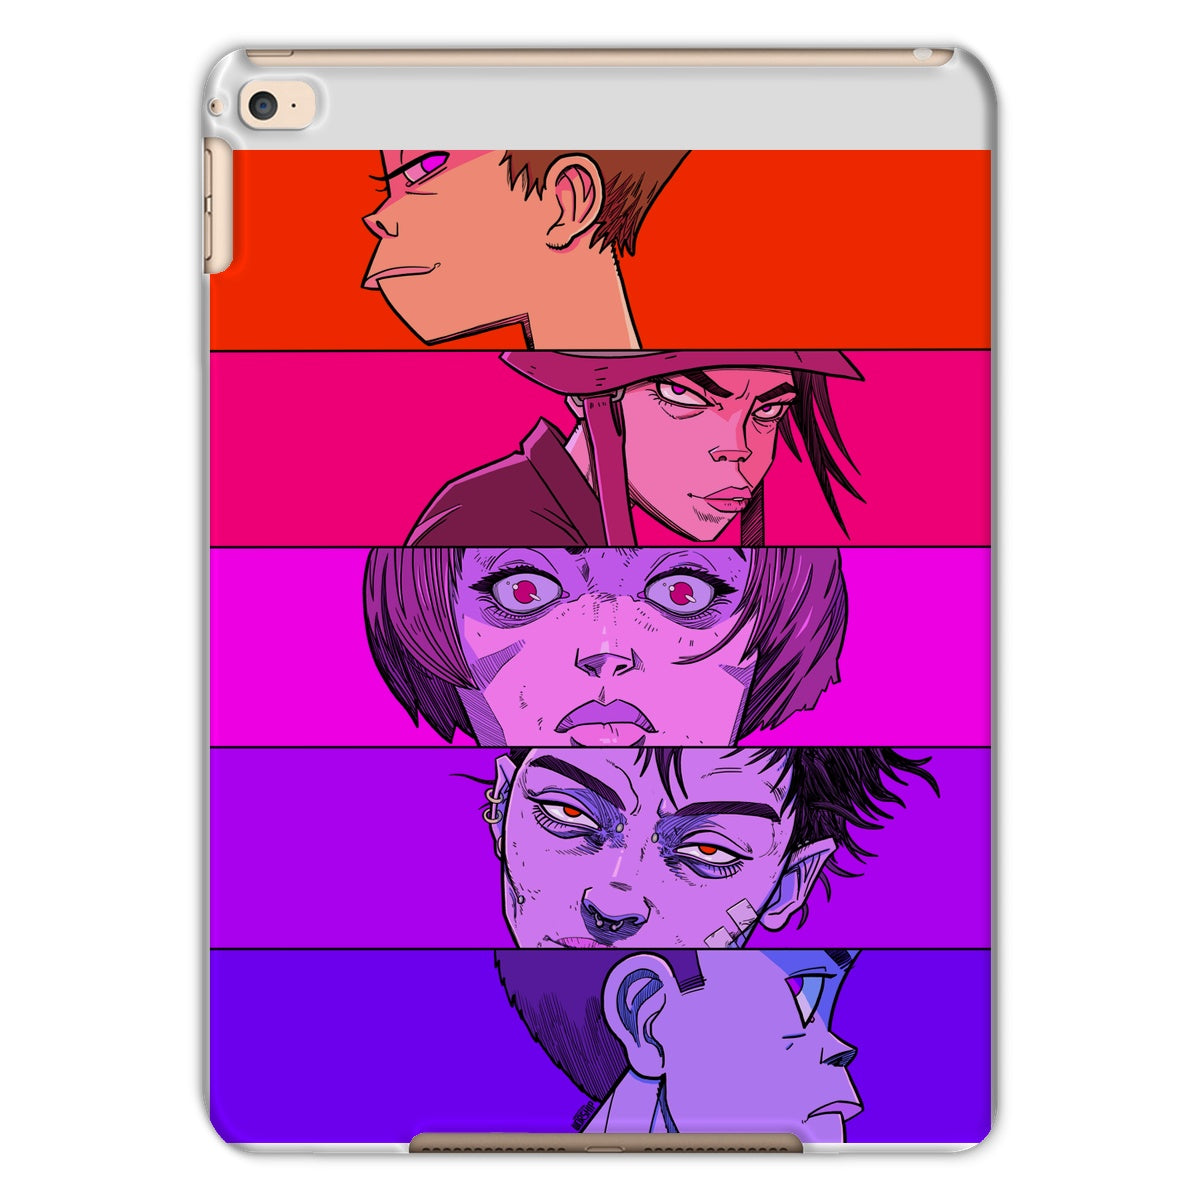 Unique and cool anime faces Tablet Case illustration